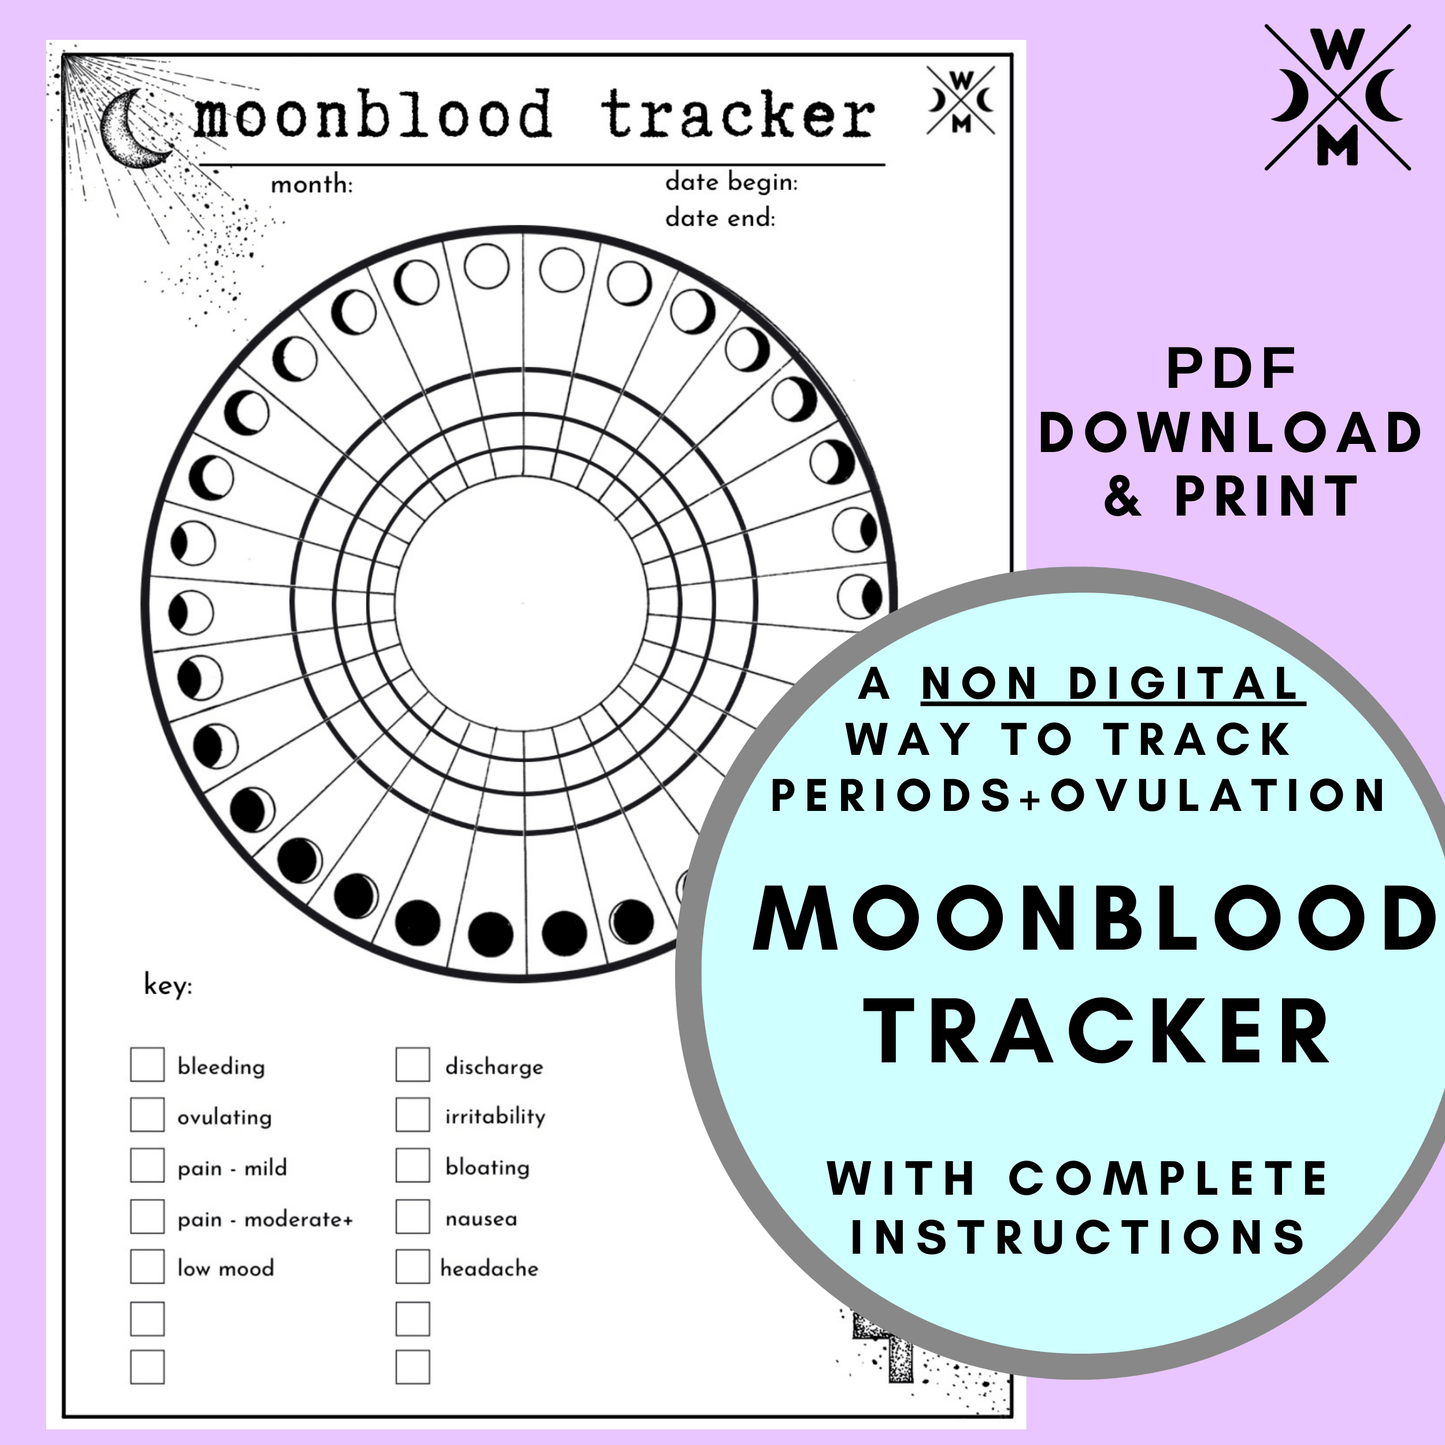 period ovulation tracker chart | mood PMS PMDD | lunar phase calendar | track with the moon - The Wandering Moon Co.